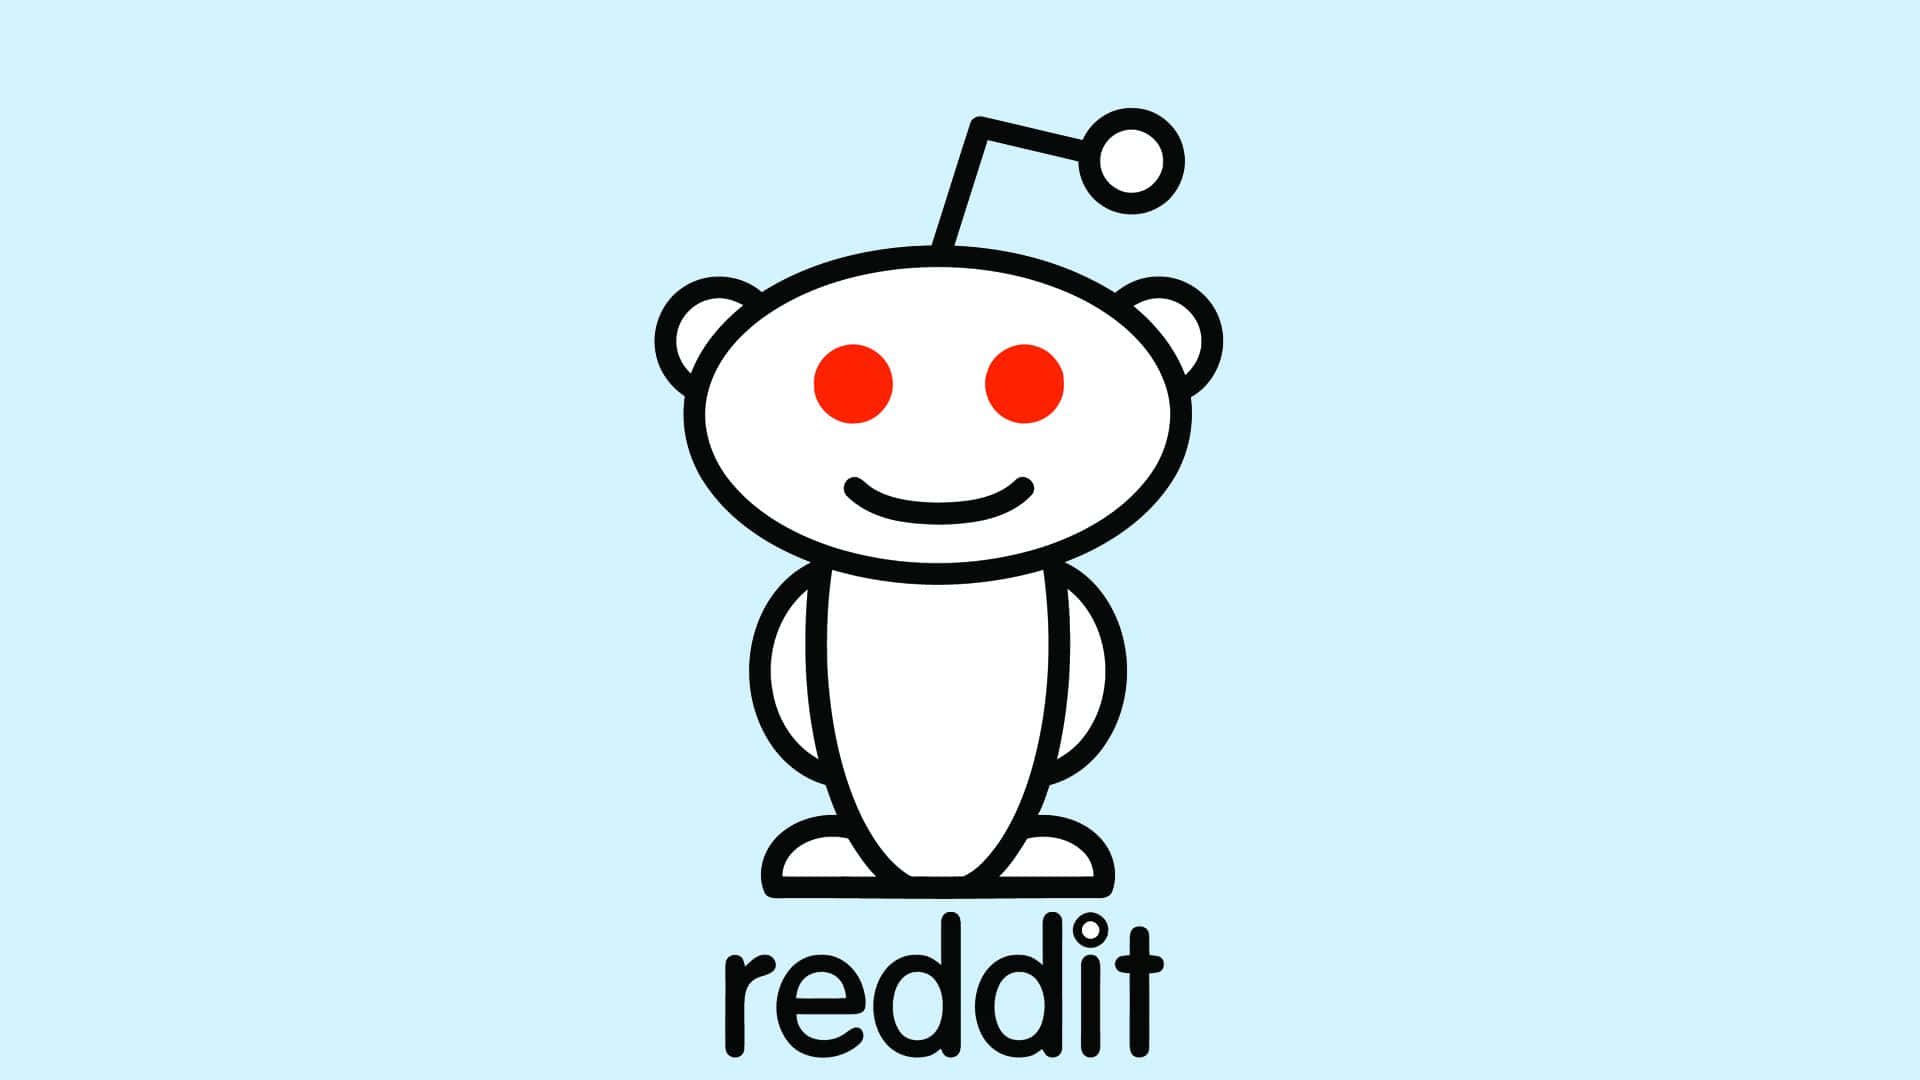 Express Your Ideas on Reddit